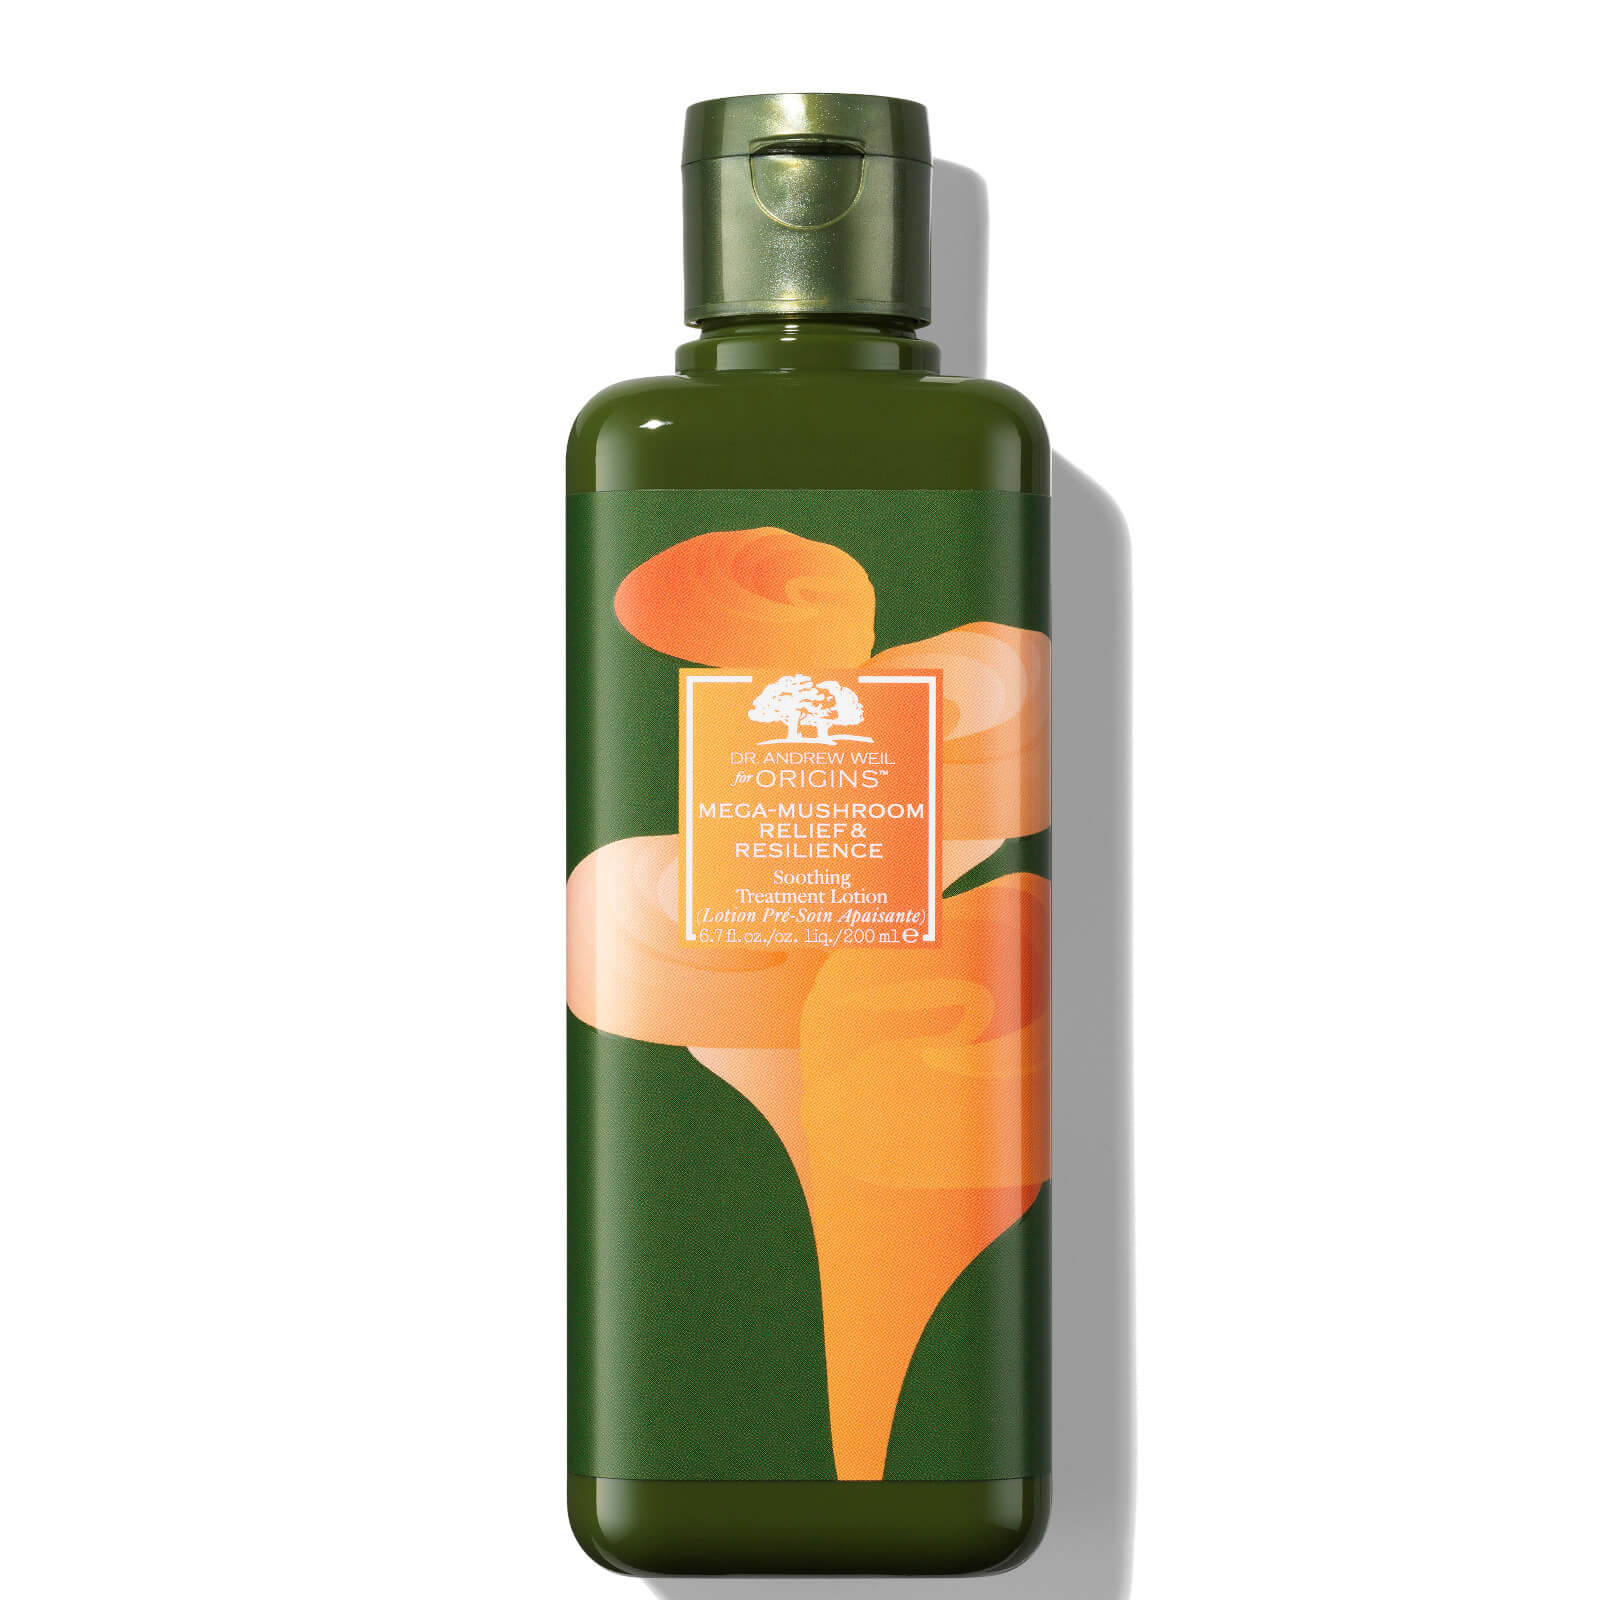 Origins Limited Edition Mega-Mushroom Relief and Resilience Soothing Treatment Lotion 200ml